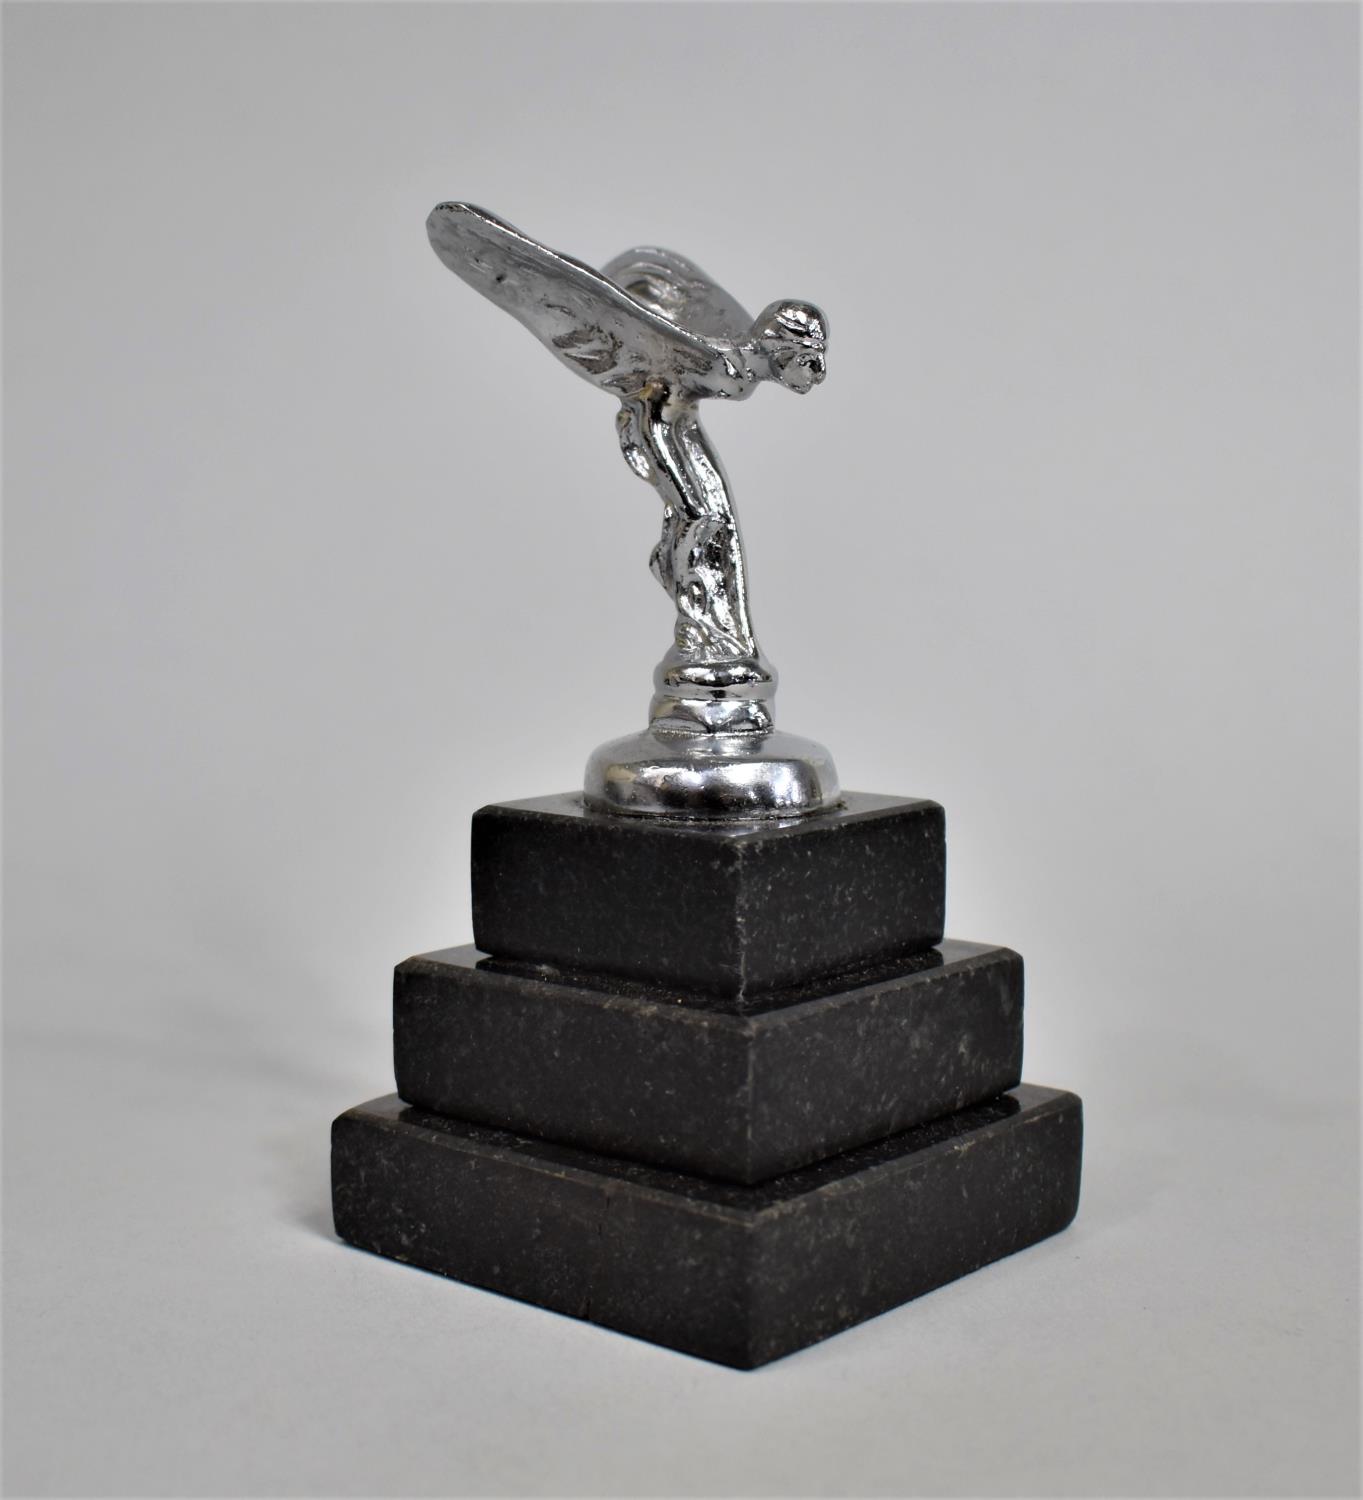 A Small Model of The Spirit of Ecstasy on Stepped Plinth, Overall Height 12cms